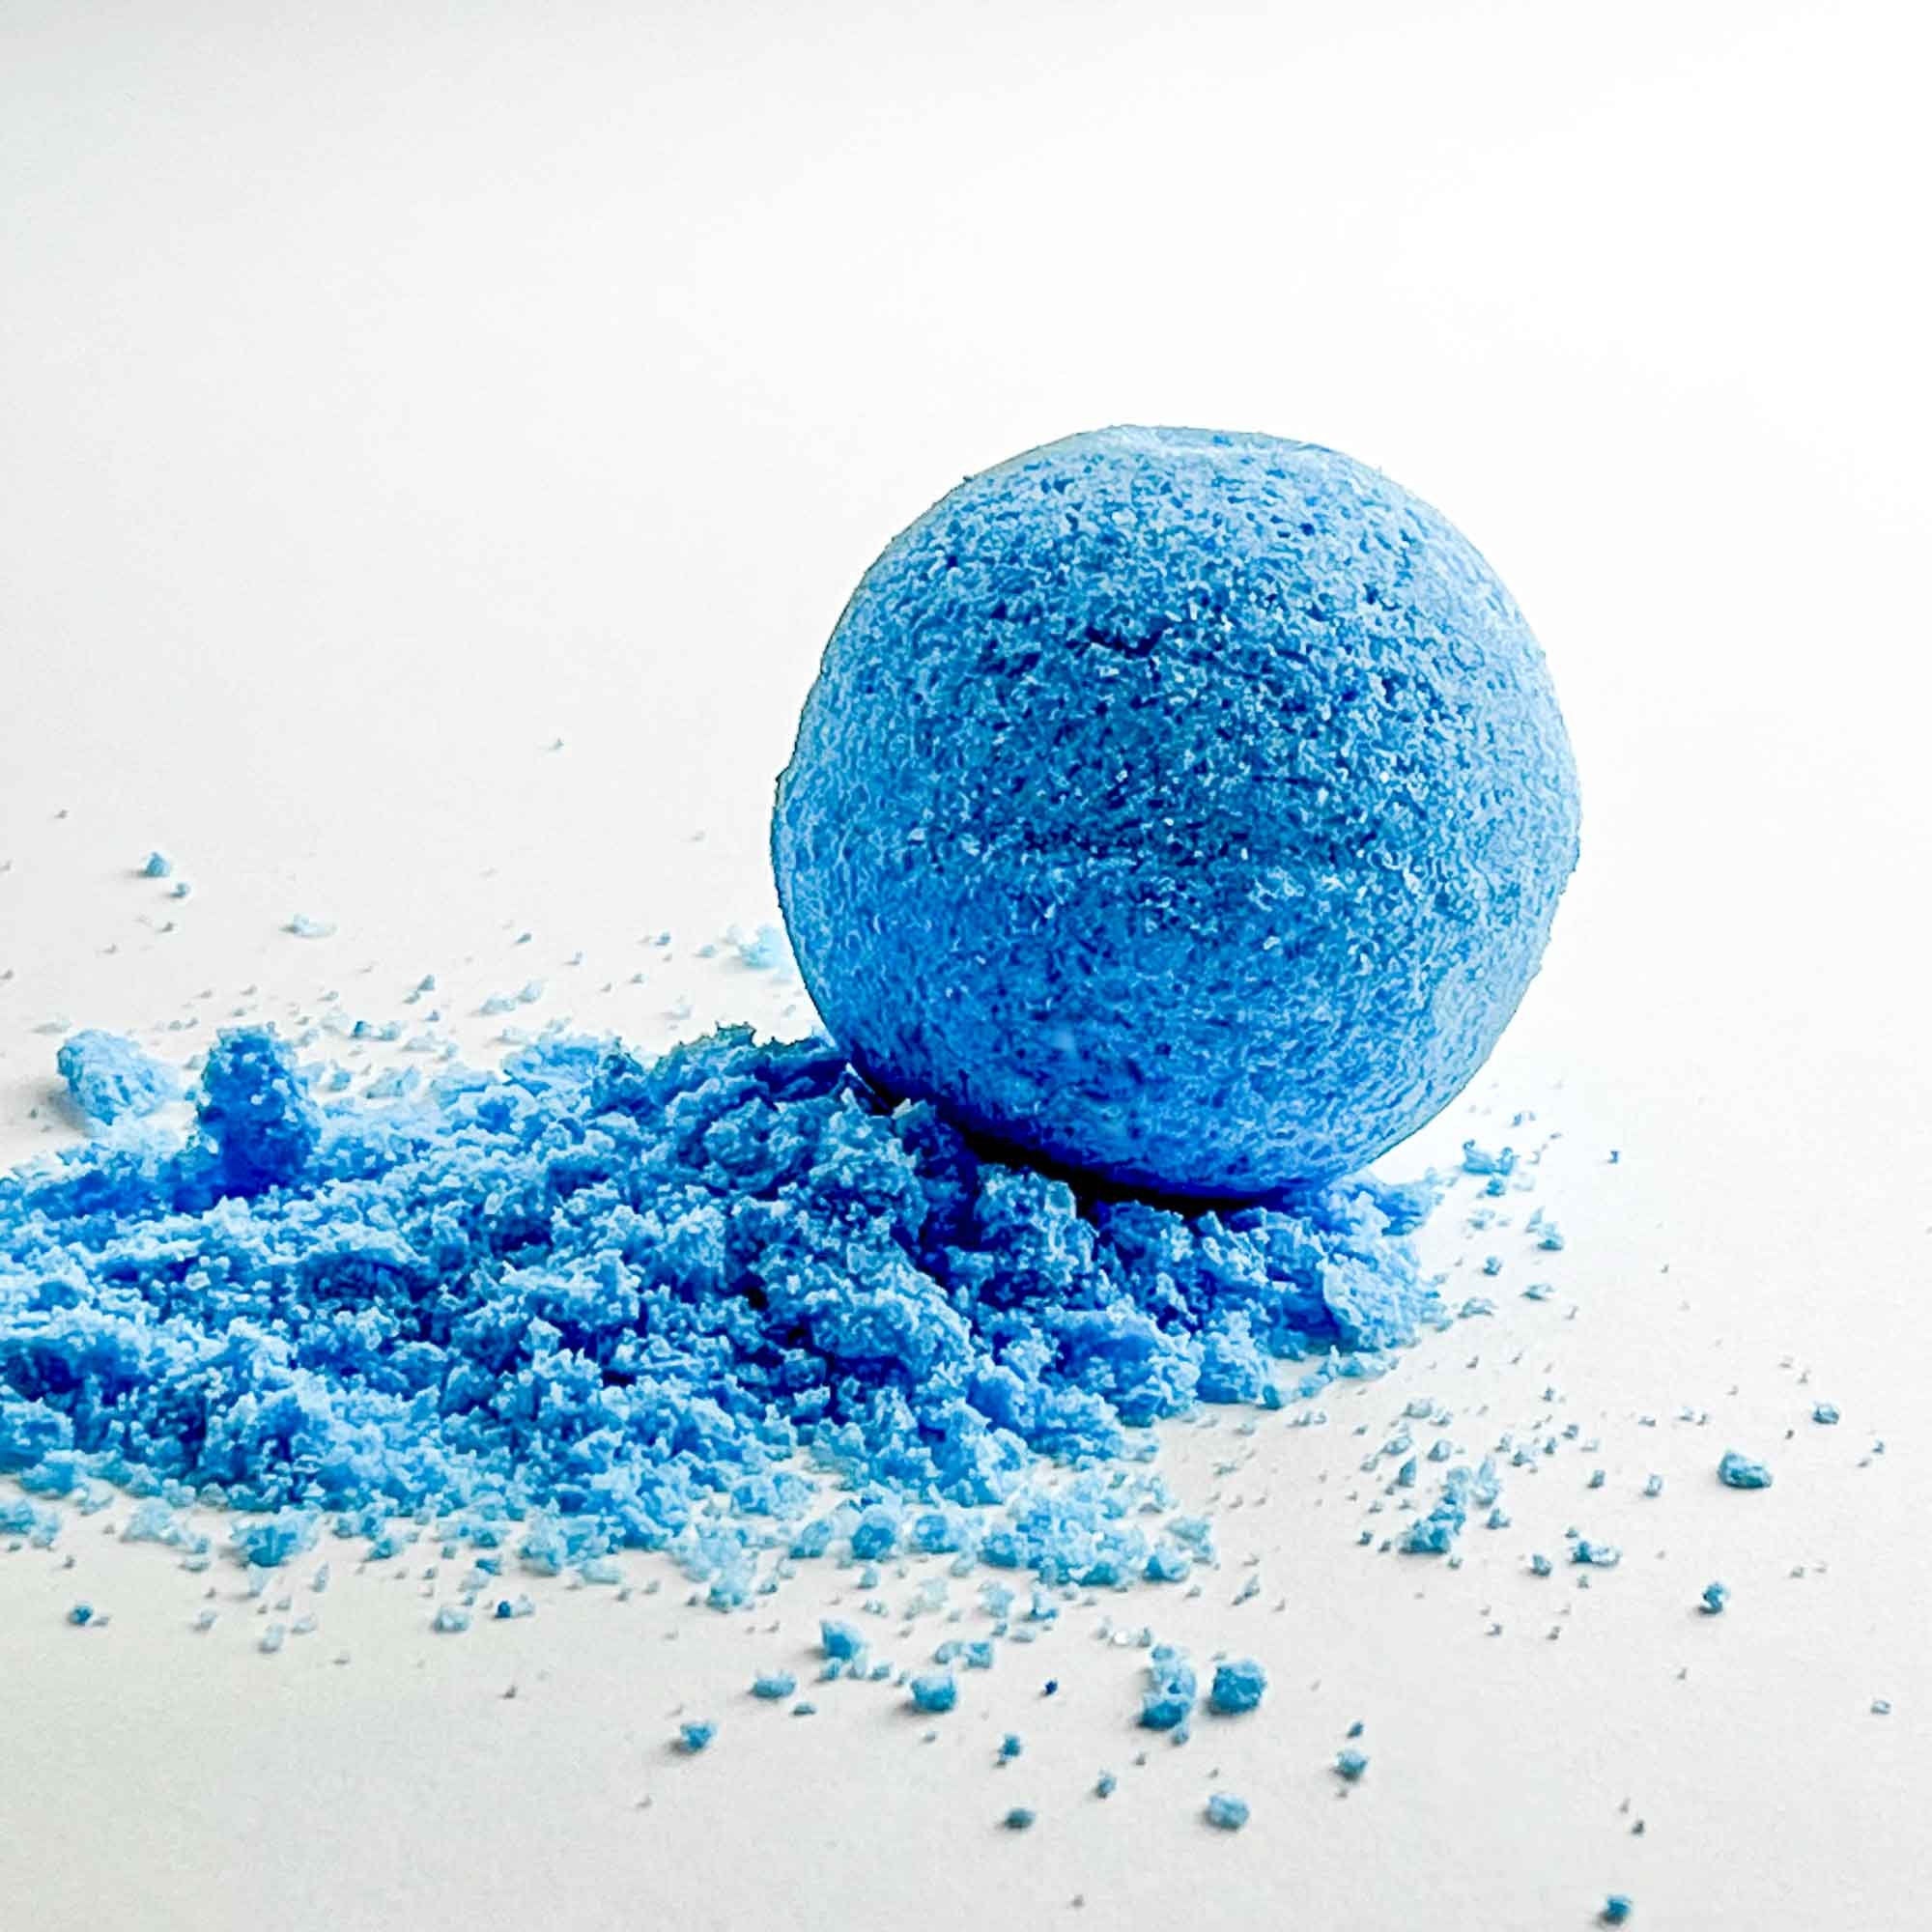 Unwind in a luxurious bath with our Ocean Rose Bath Bombs. Infused with natural ingredients, they&